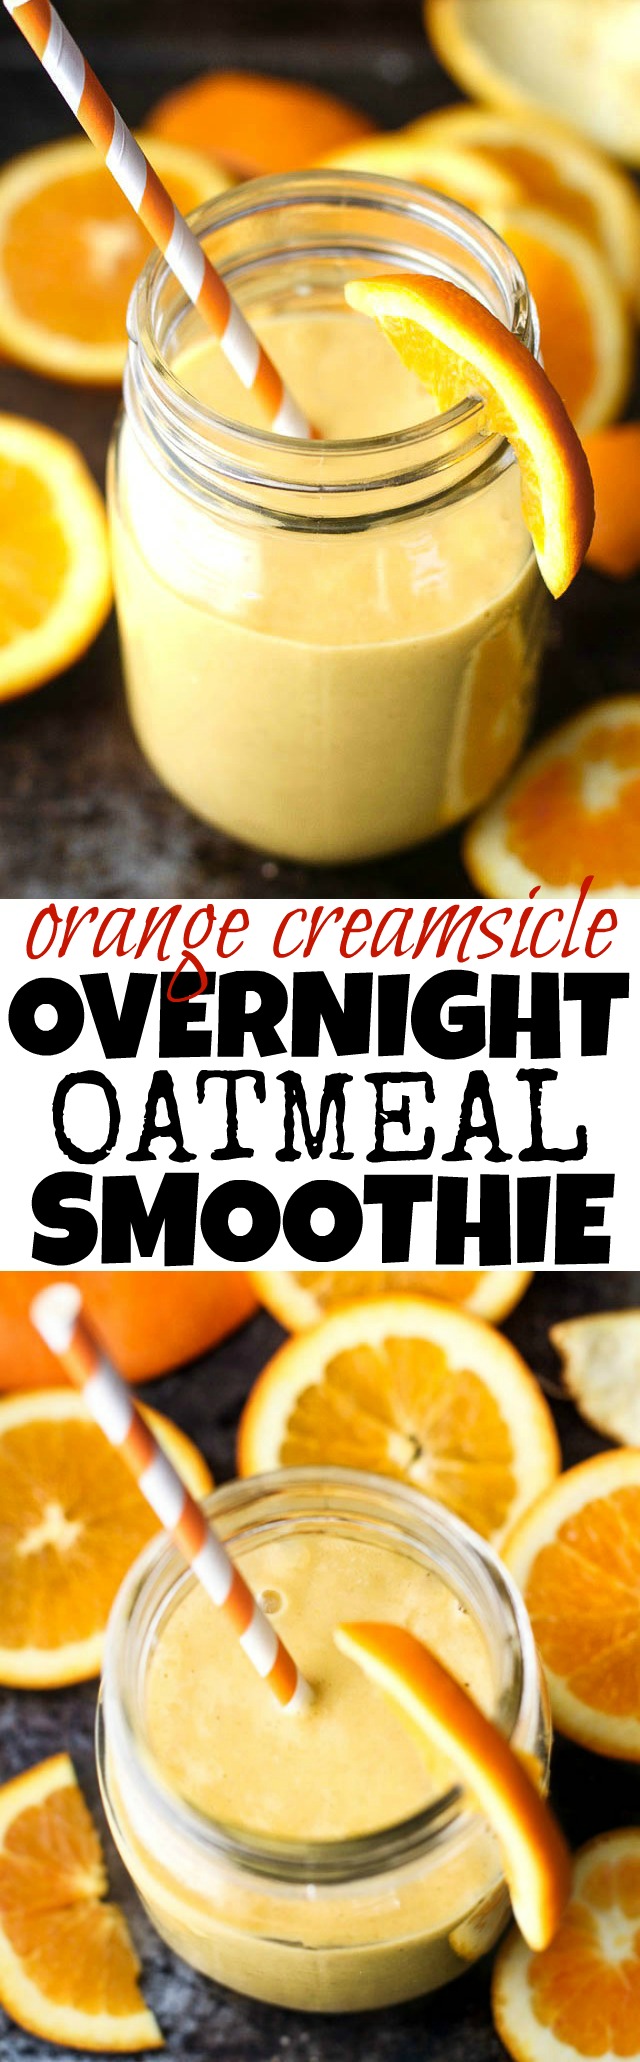 This creamy and refreshing Orange Creamsicle Overnight Oatmeal Smoothie tastes just like a drinkable Creamsicle! Only BETTER because it's vegan, refined-sugar-free, and packed with vitamins! | runningwithspoons.com #healthy #recipe #breakfast